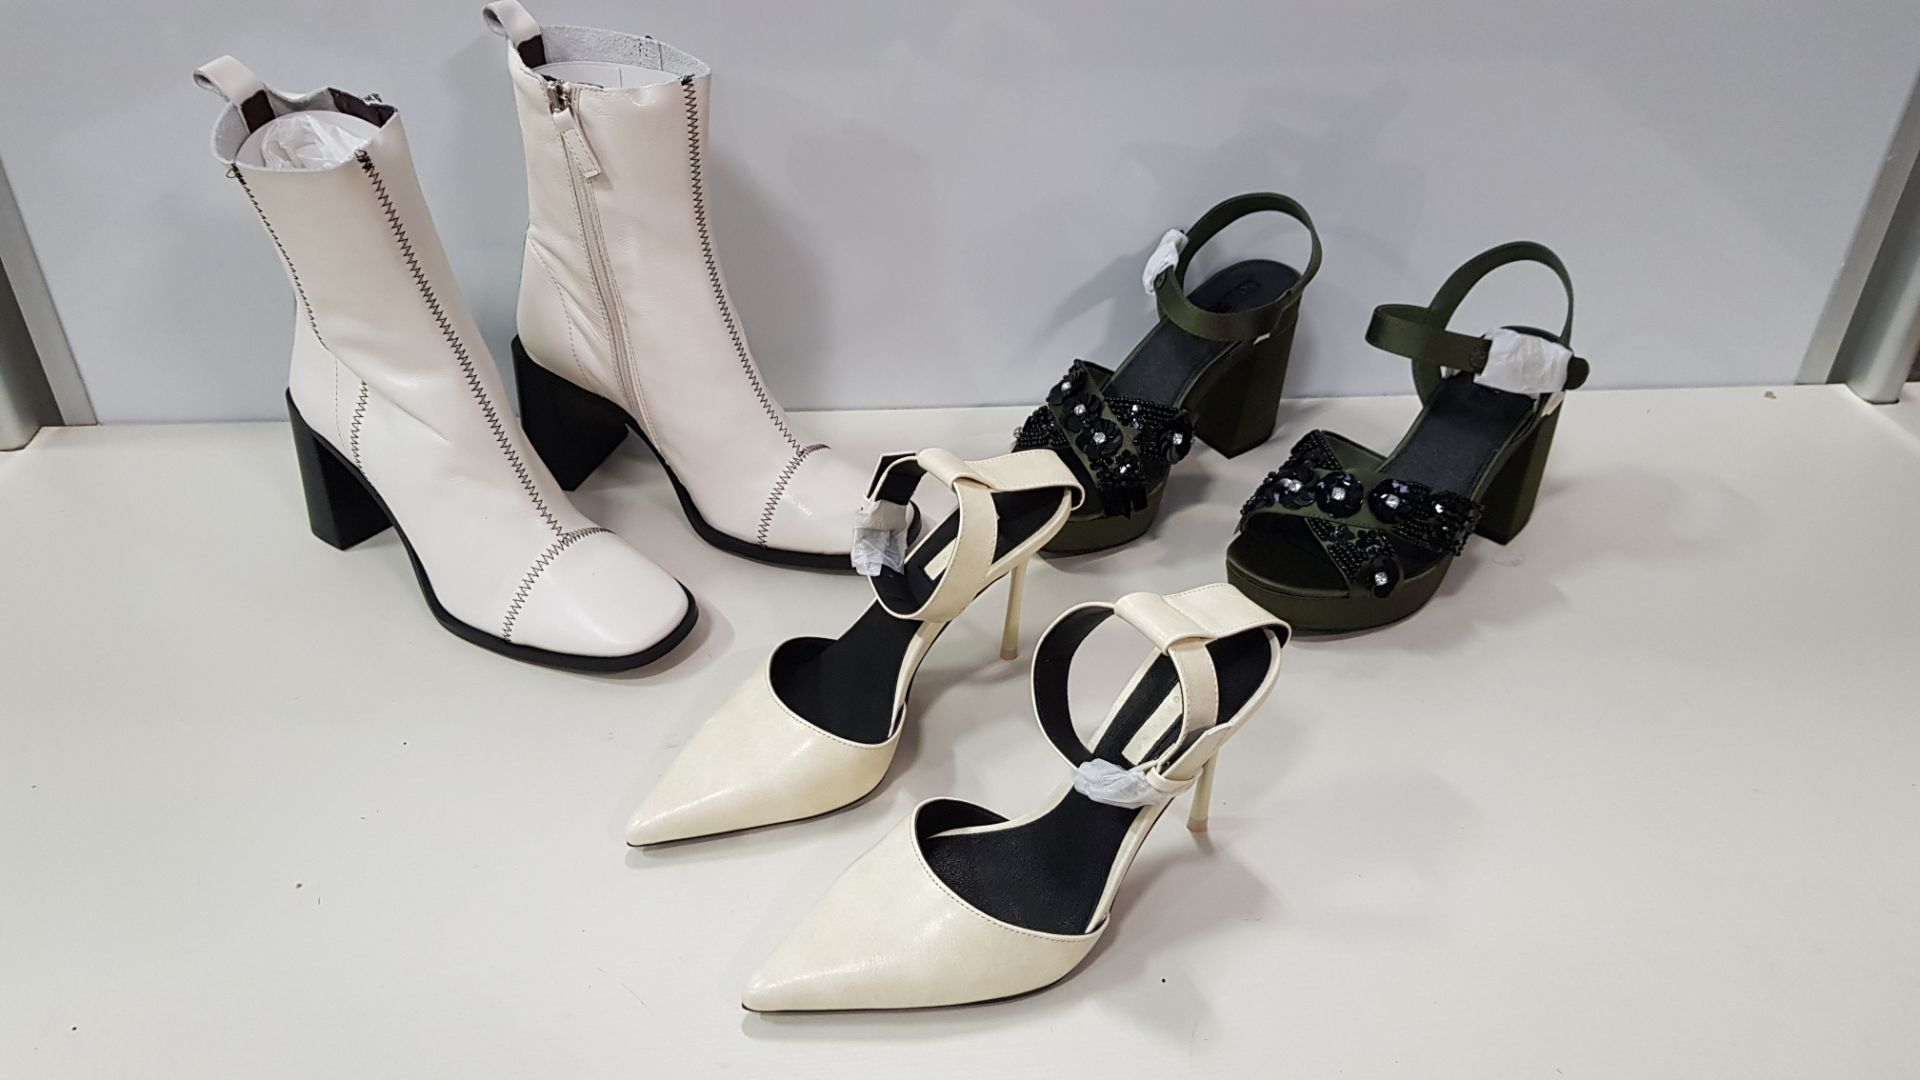 17 PIECE MIXED TOPSHOP SHOE LOT CONTAINING 5 X WHITE HOME RUN LEATHER HEELED ANKLE BOOTS RRP £89.